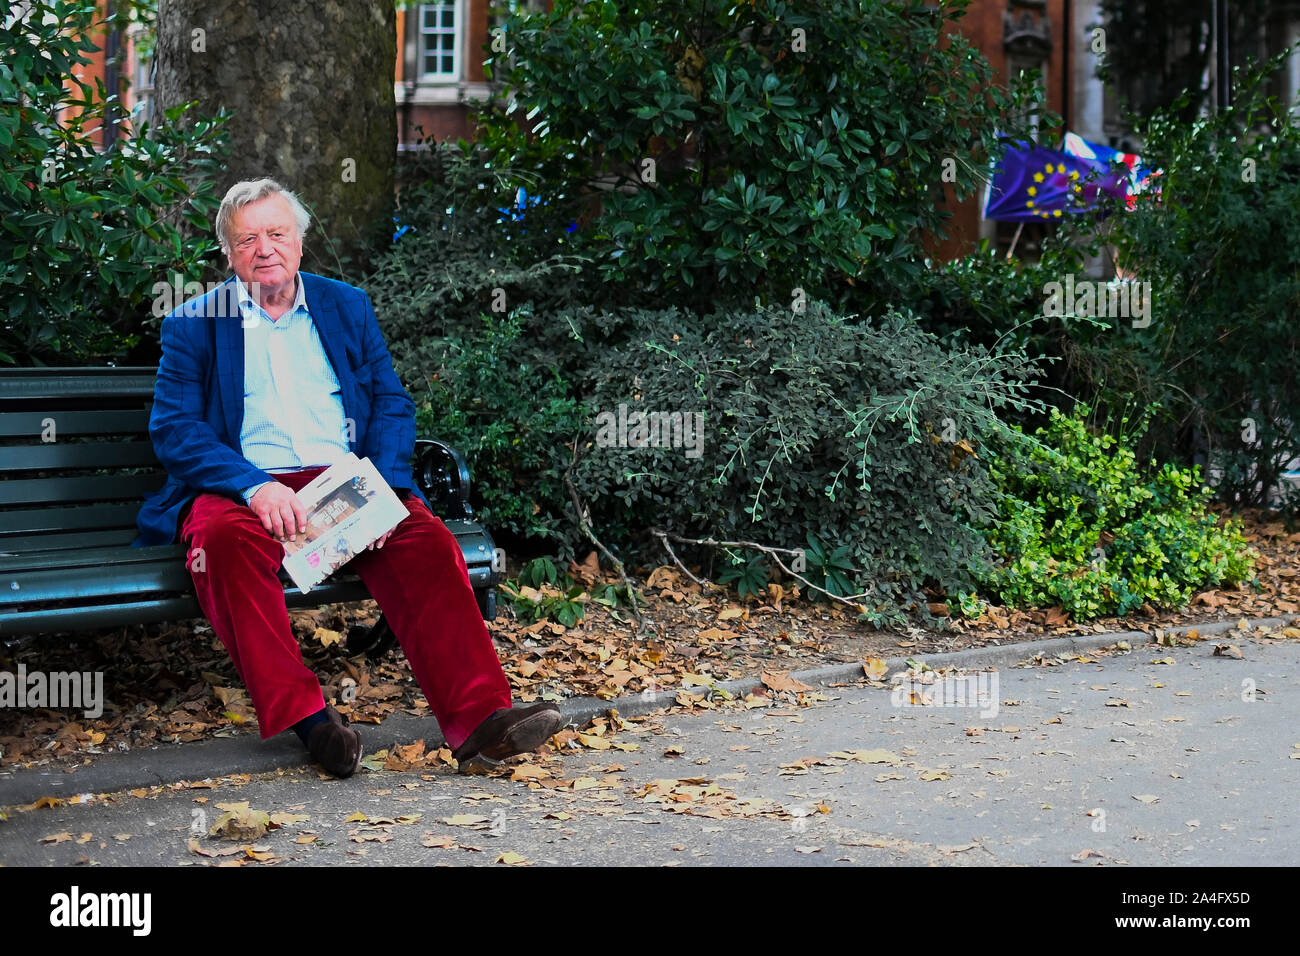 London, UK. Politician Ken Clarke sits on a bench in Victoria Tower Gardens with European flags in the background. Stock Photo